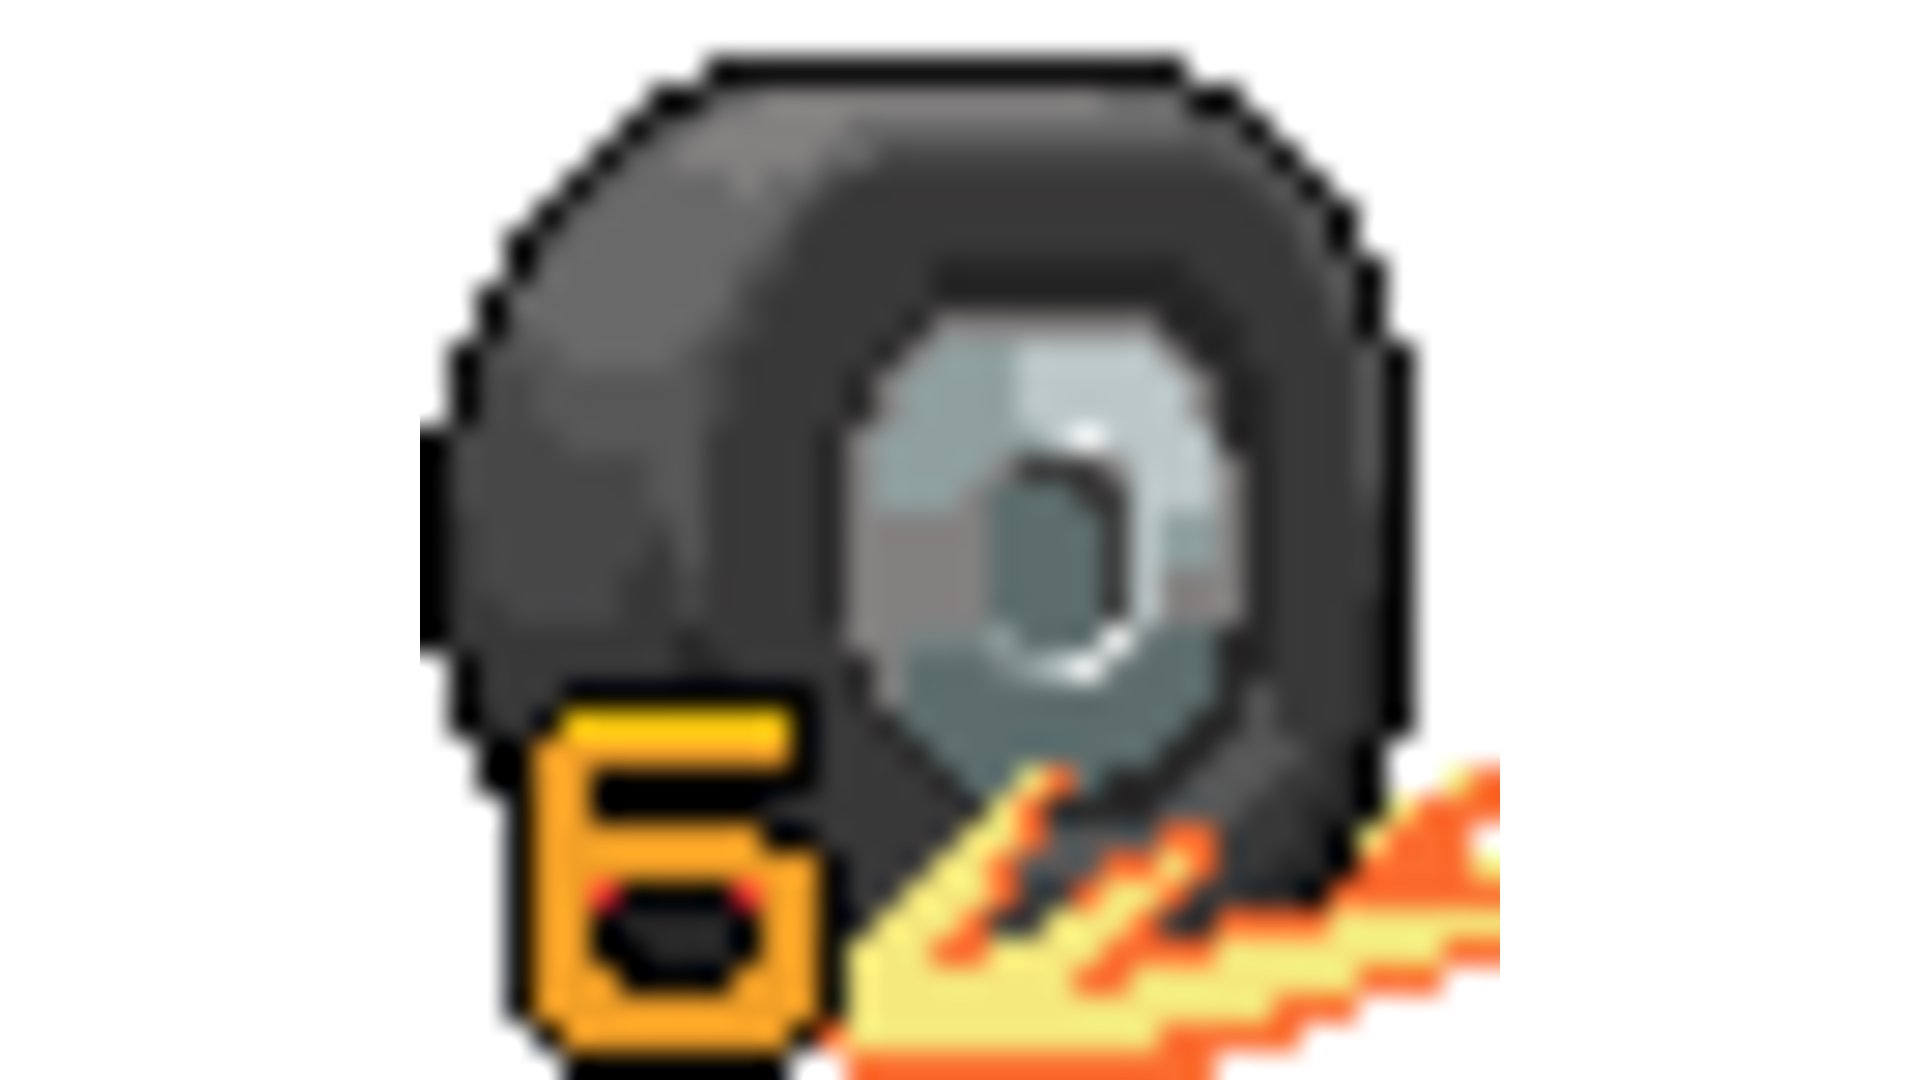 Icon for I Use Tyres Like a Pen